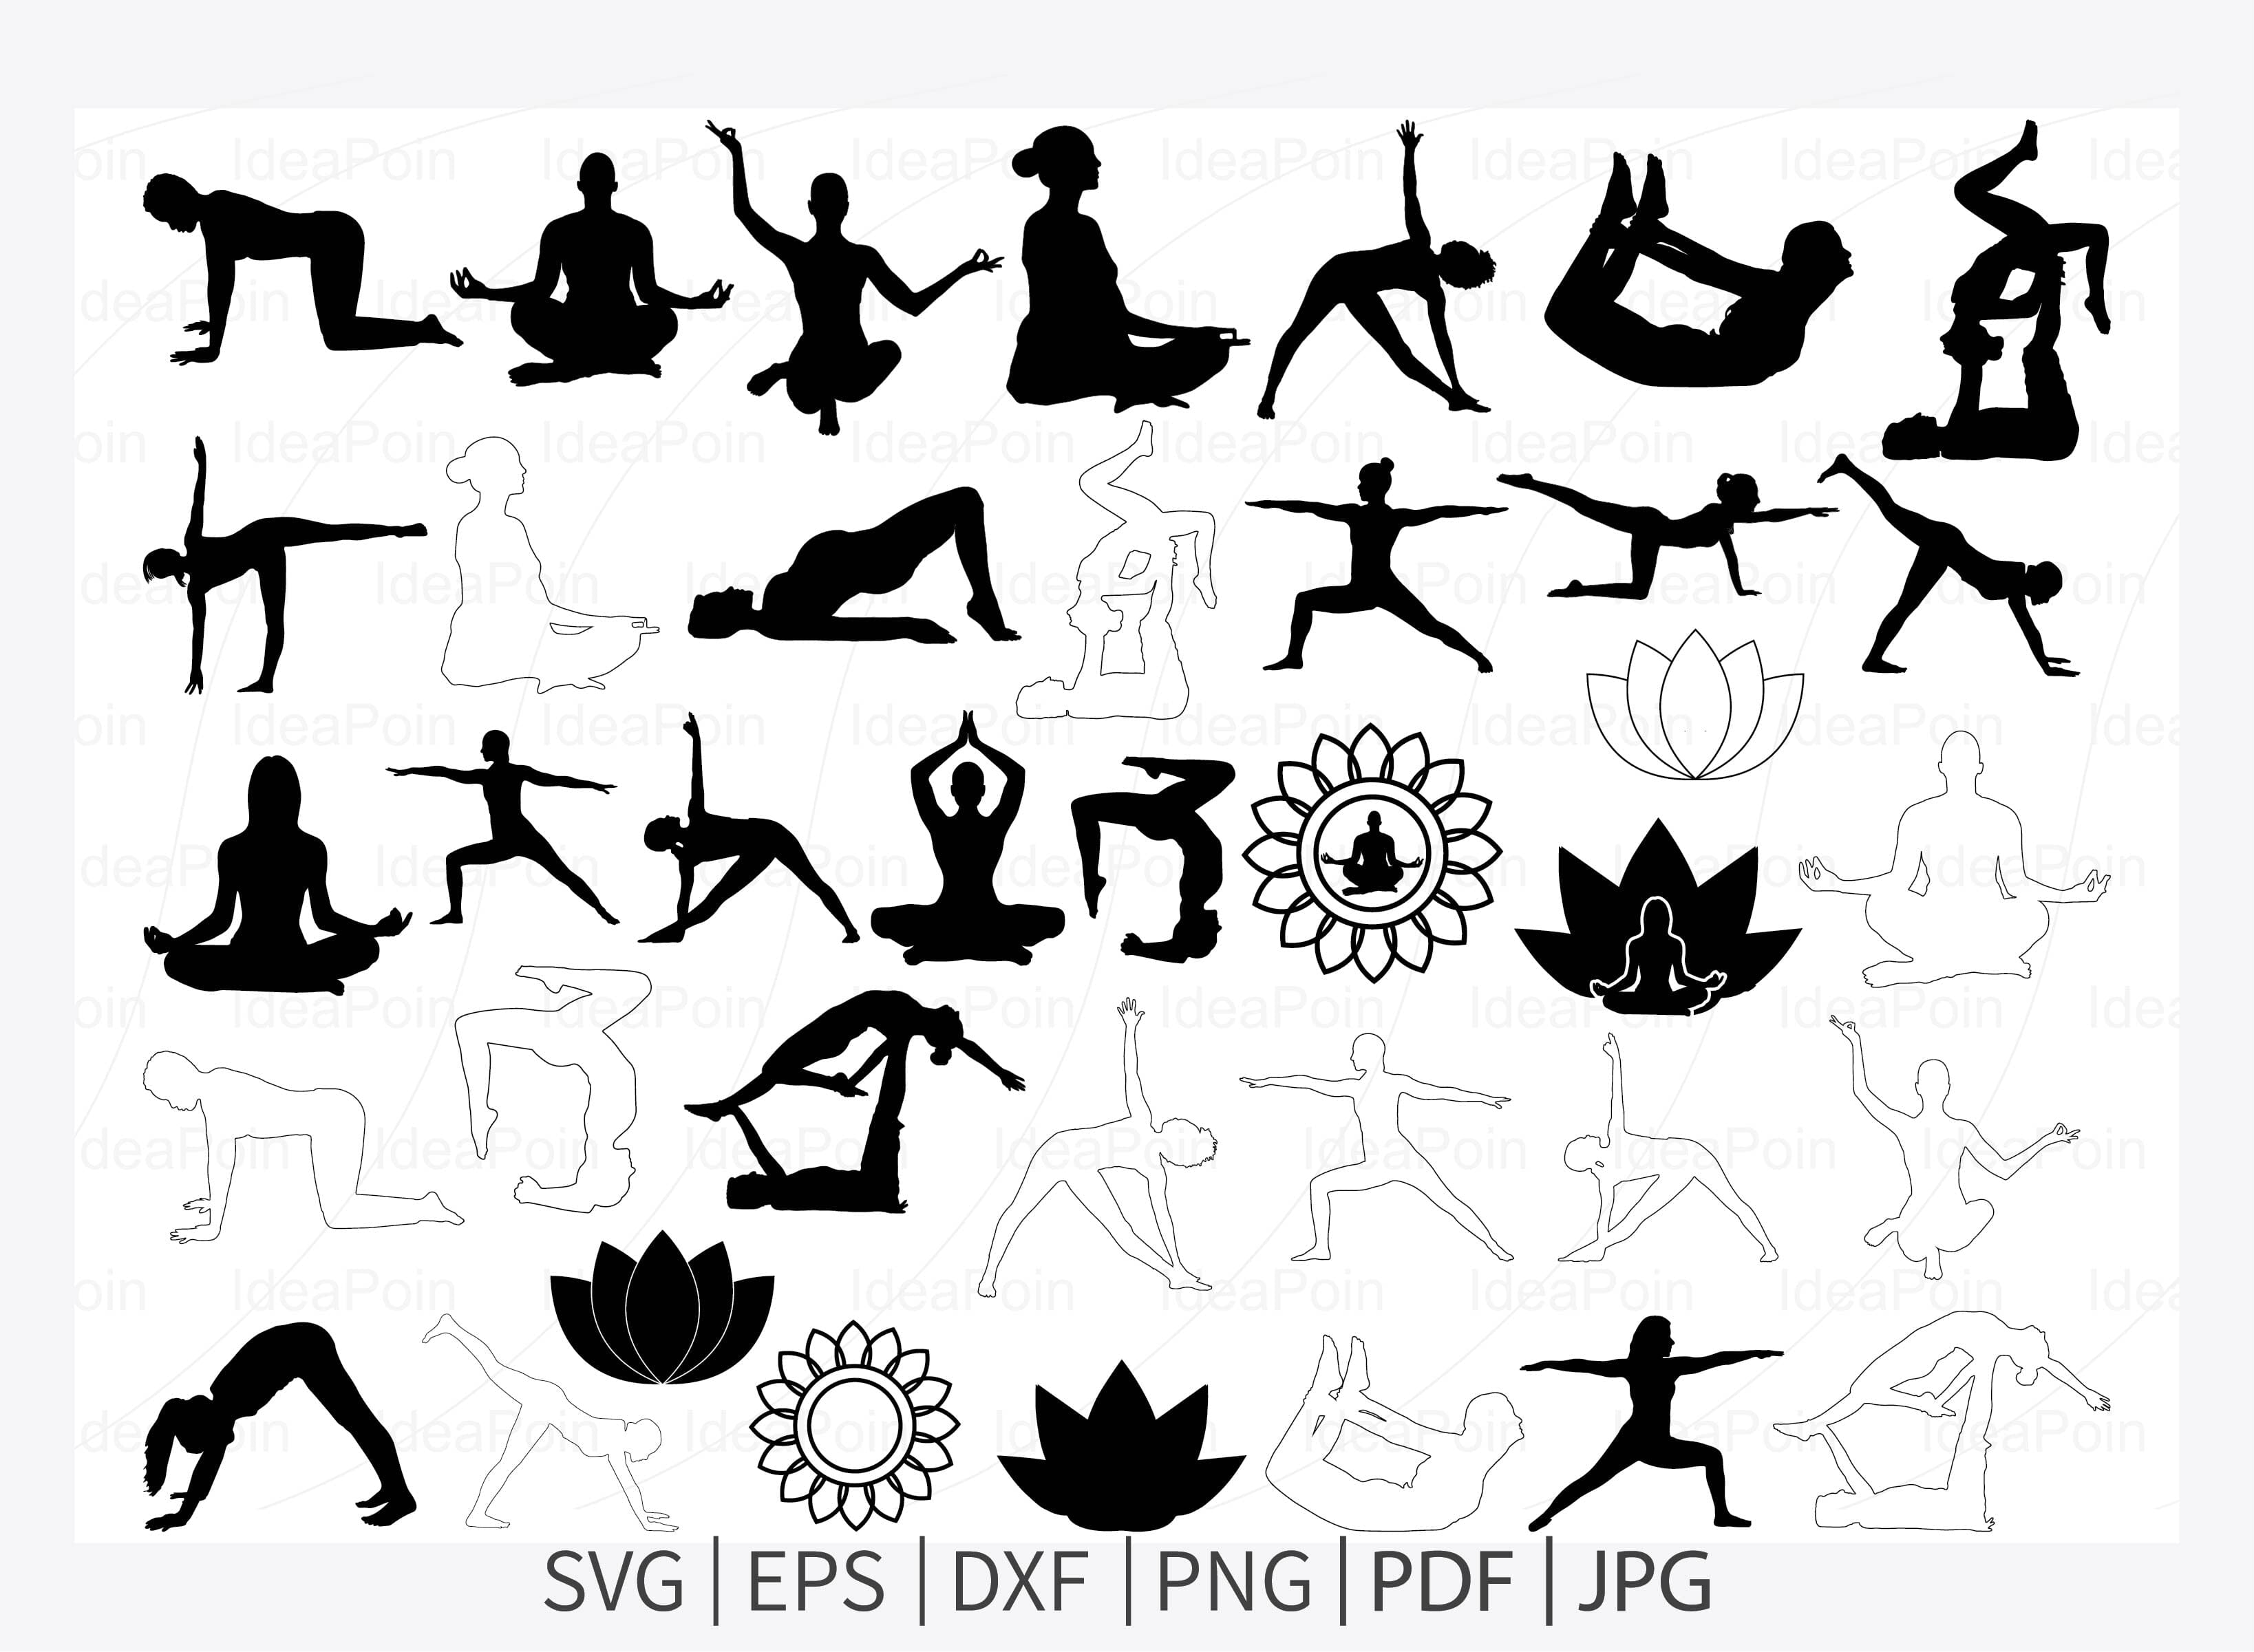 Women in warrior 3 yoga pose hand drawn outline doodle icon. Yoga poses,  balance, fitness and wellness concept. Vector sketch illustration for  print, web, mobile and infographics on white background. - Stock